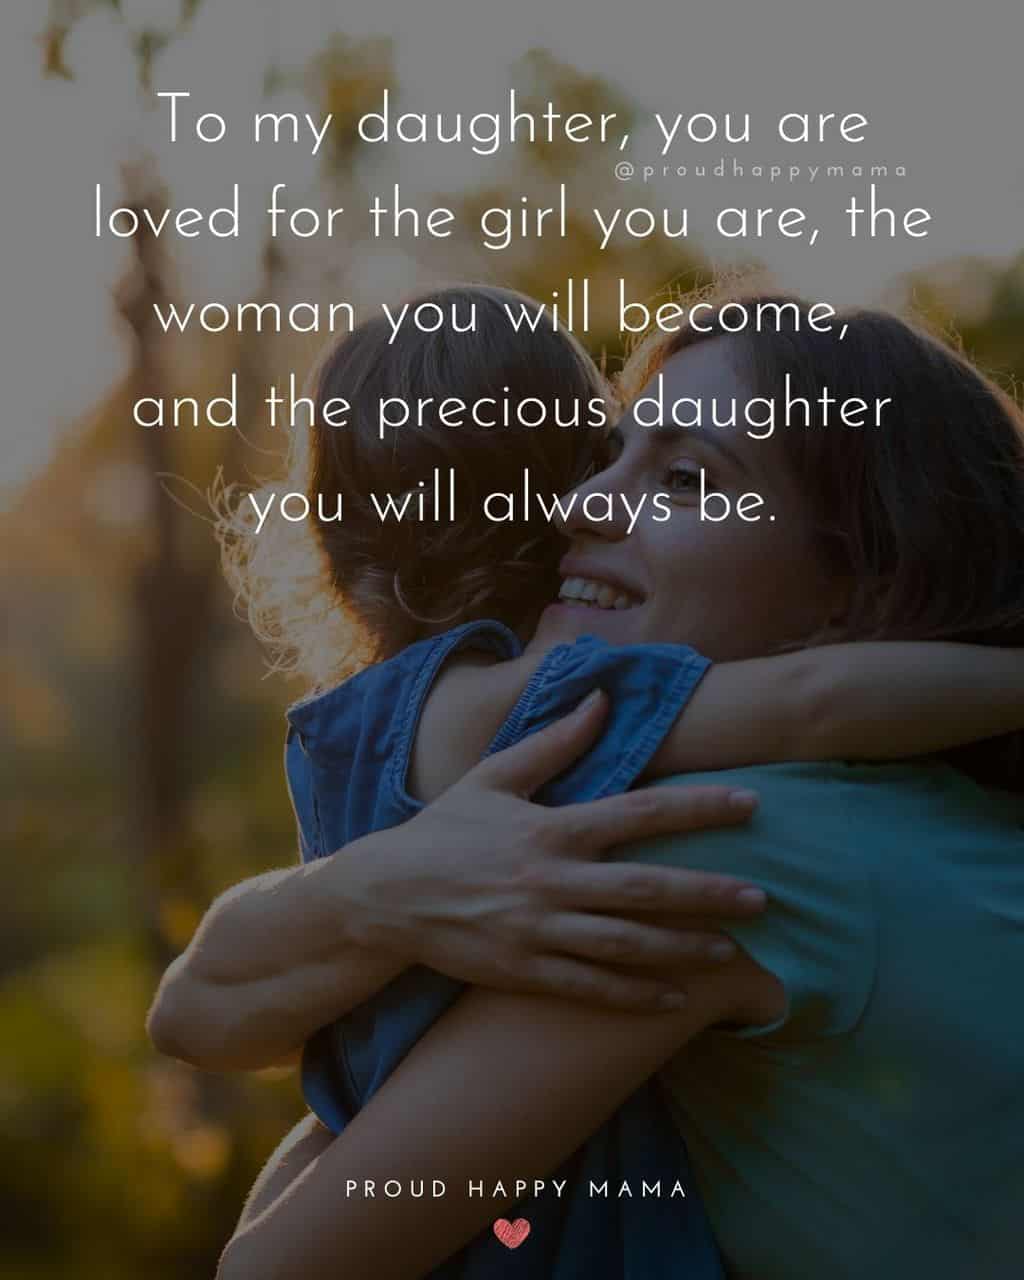 i love you daughter quotes - ‘To my daughter, you are loved for the girl you are, the woman you will become, and the precious daughter you will